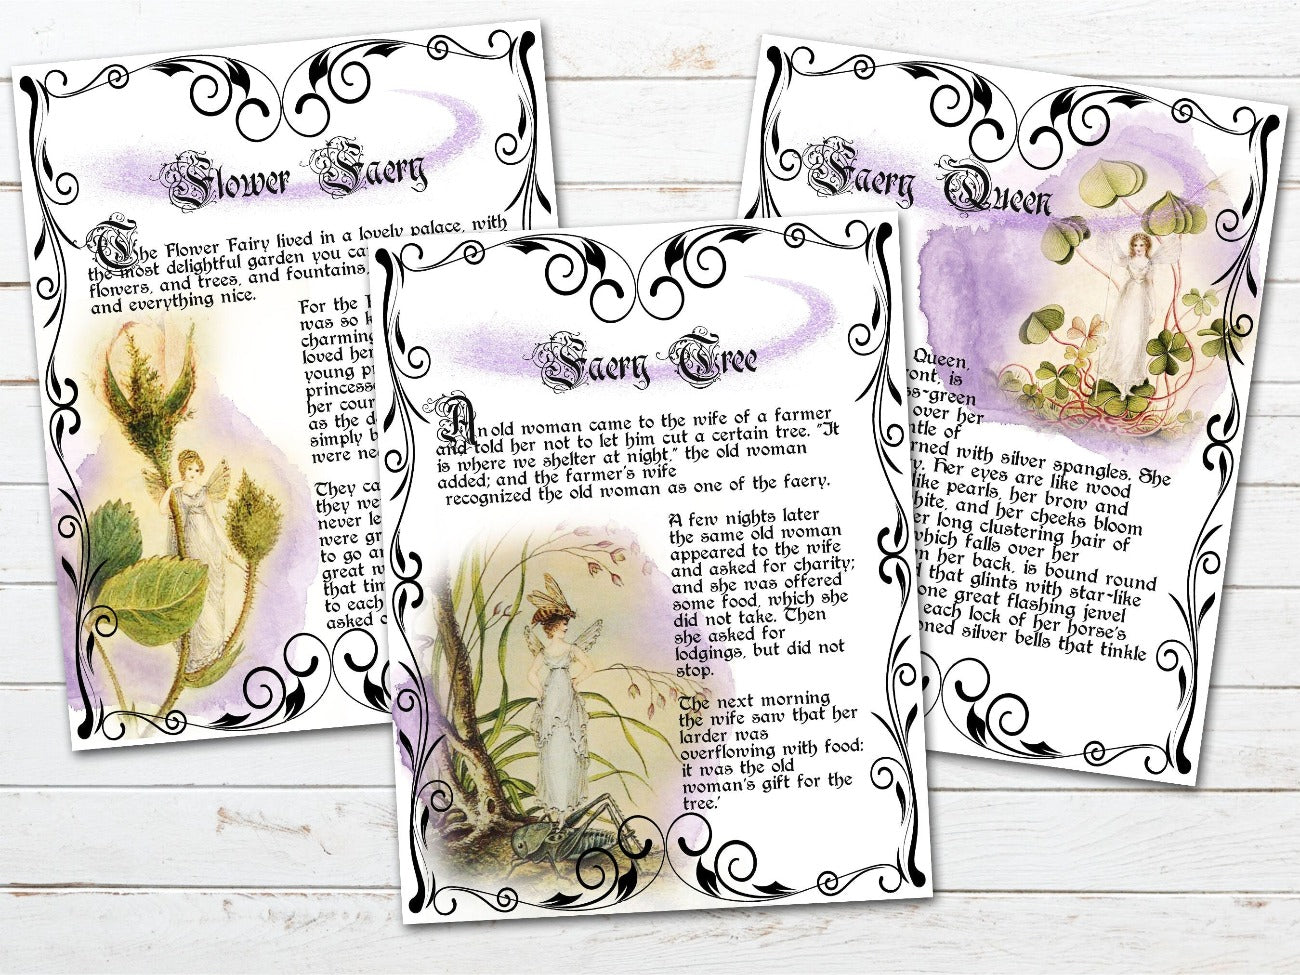 Flower Faery, Faery Tree, Faery Queen pages - Morgana Magick Spell